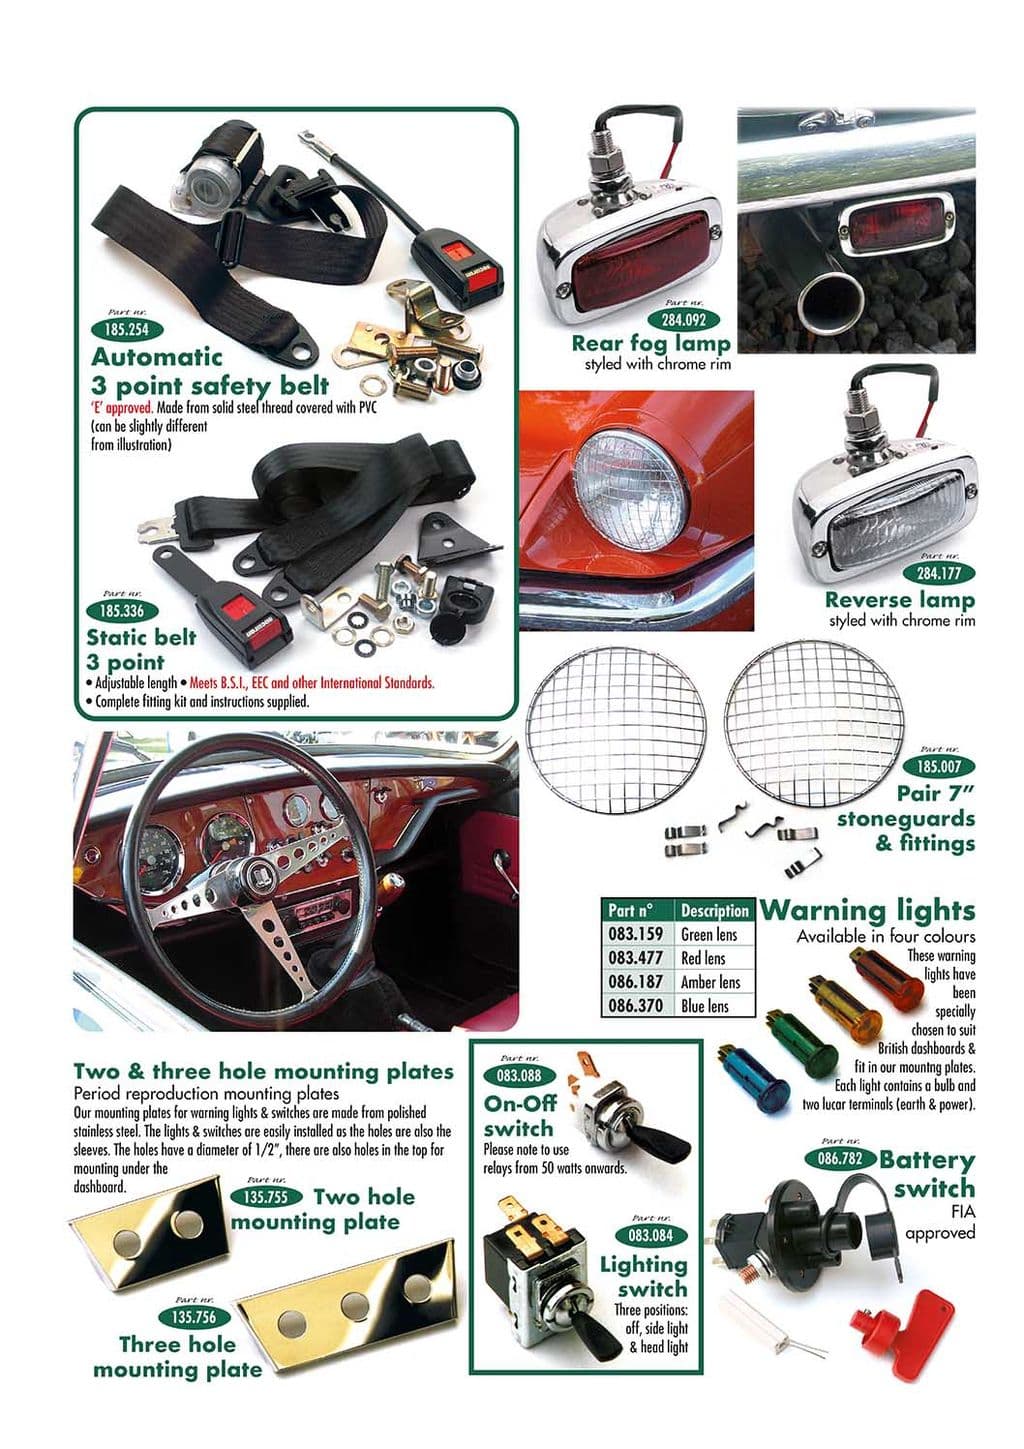 Safety parts & accessories - Safety parts - Maintenance & storage - MG Midget 1964-80 - Safety parts & accessories - 1